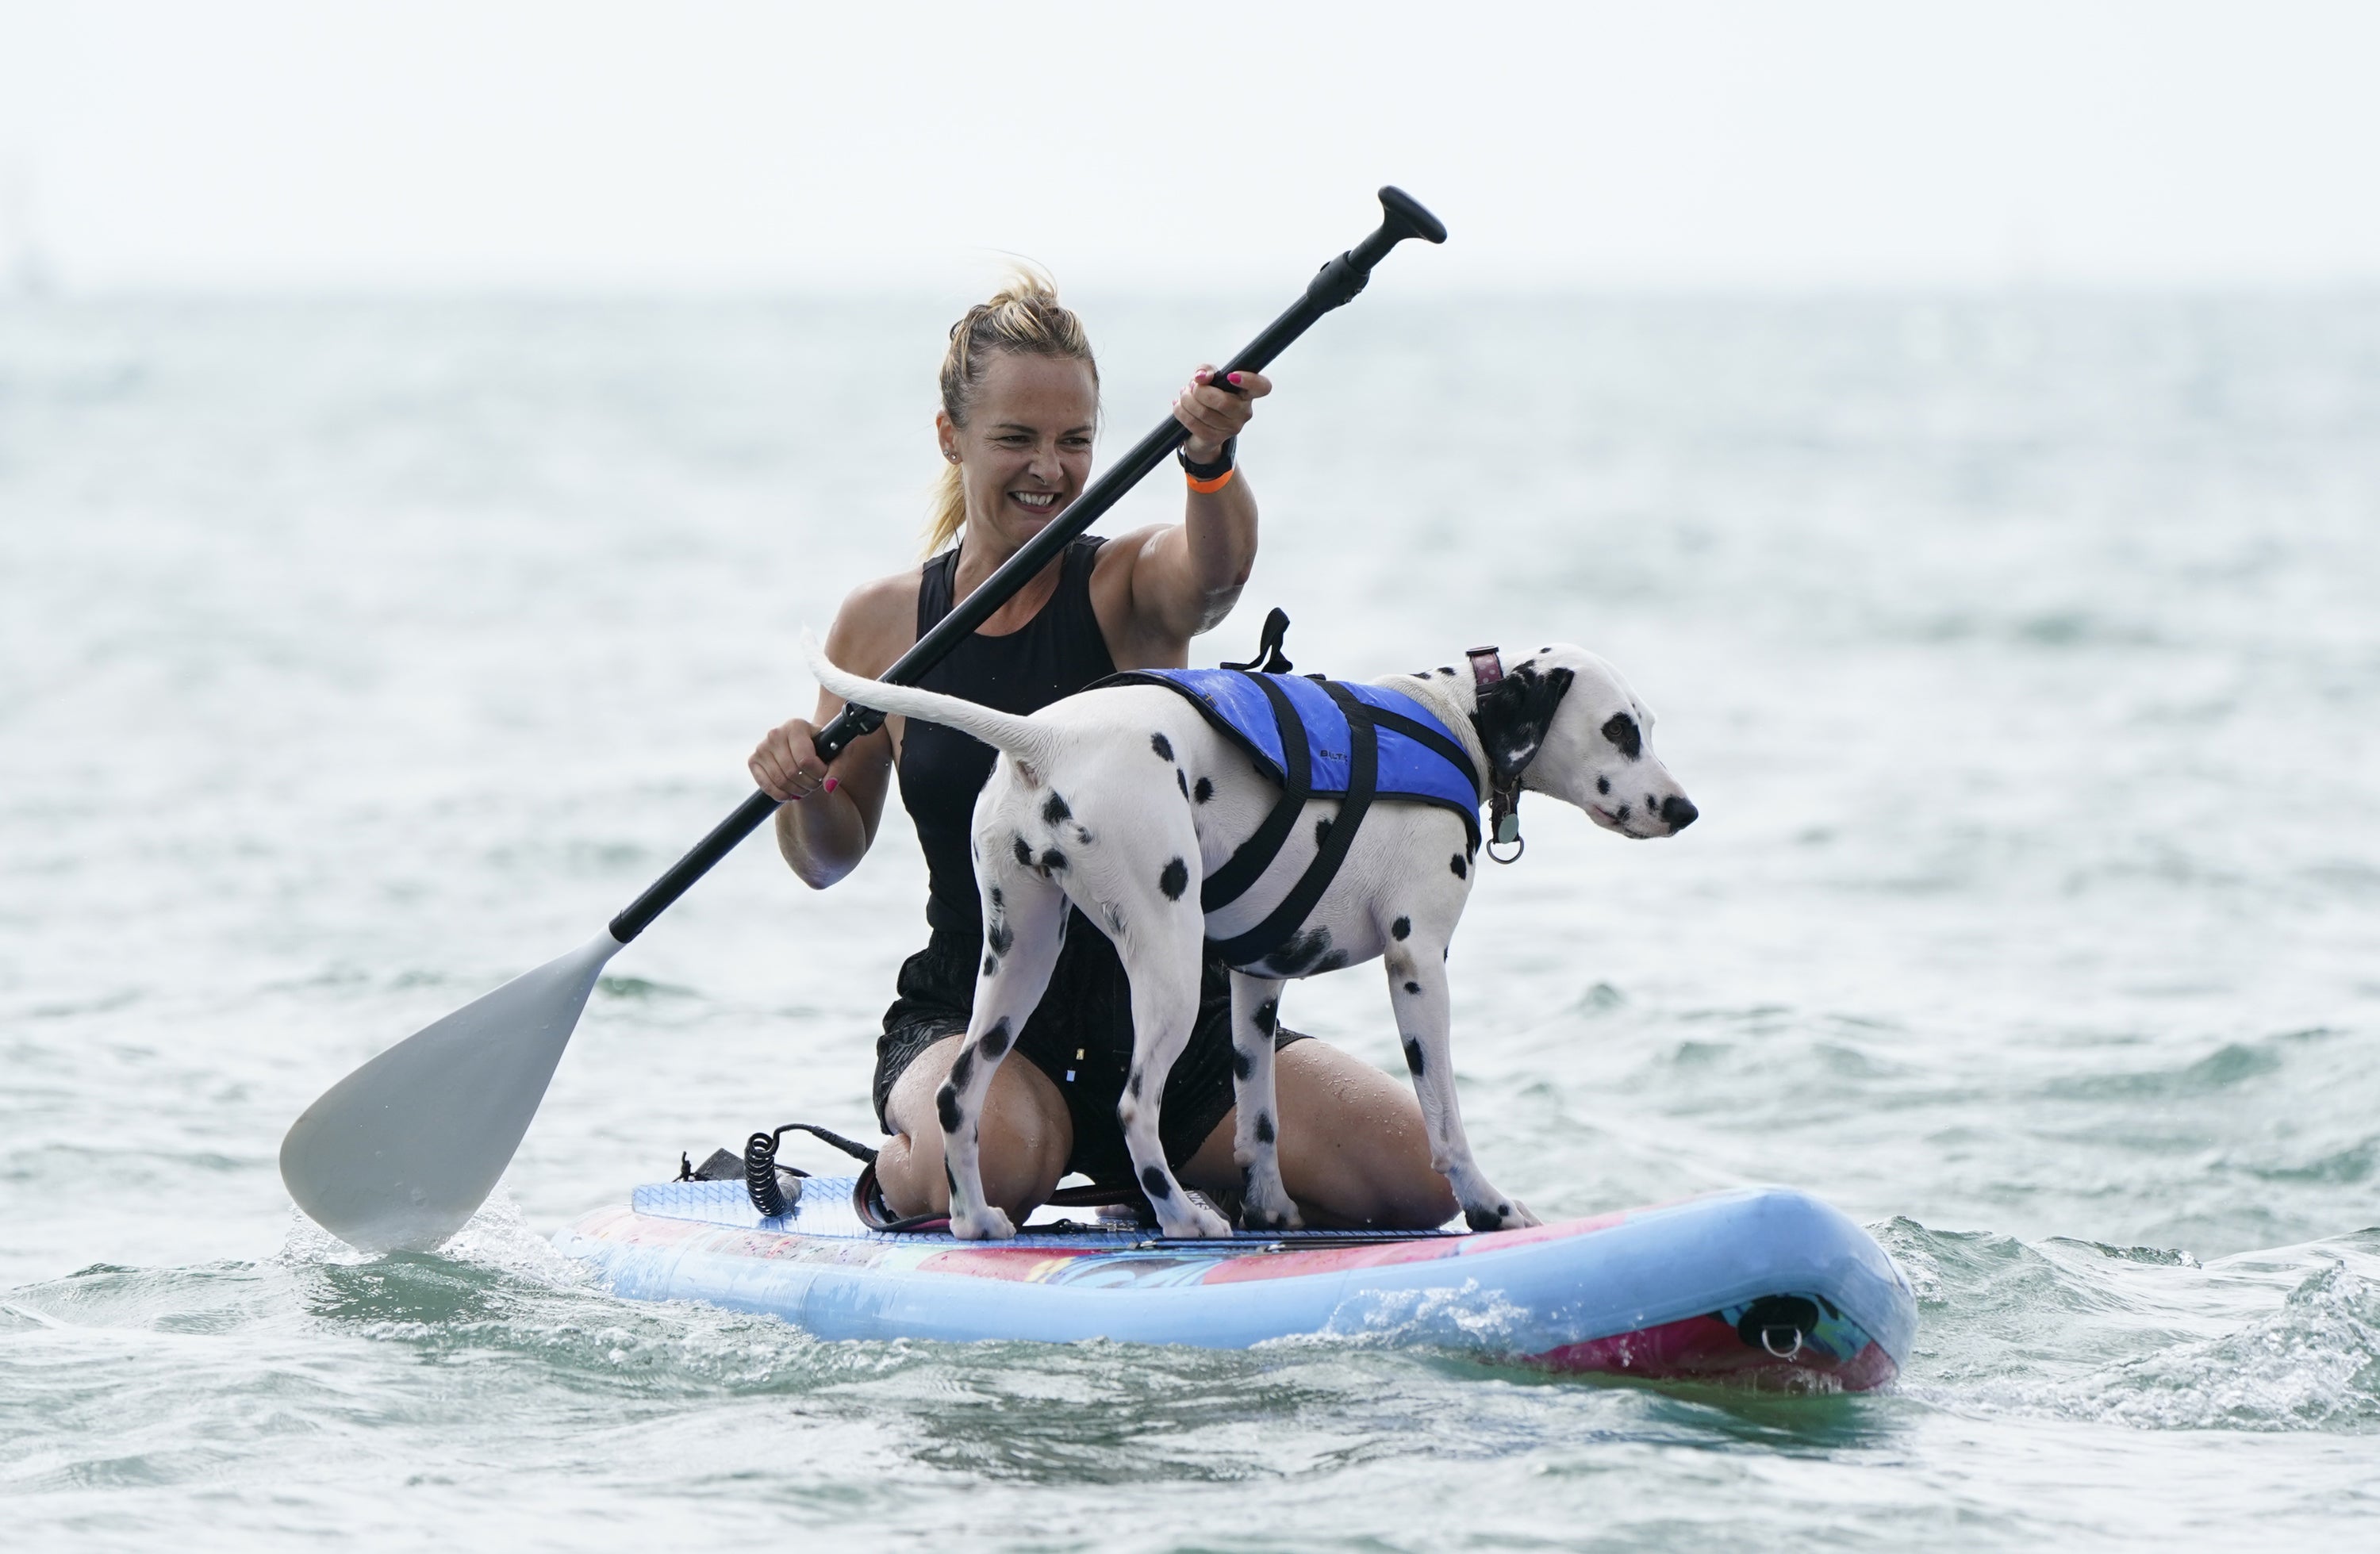 Marina White and her dog Coco take part in a heat during the Dog Masters 2022 UK Dog Surfing Championships at Branksome Dene Chine beach in Poole, Dorset